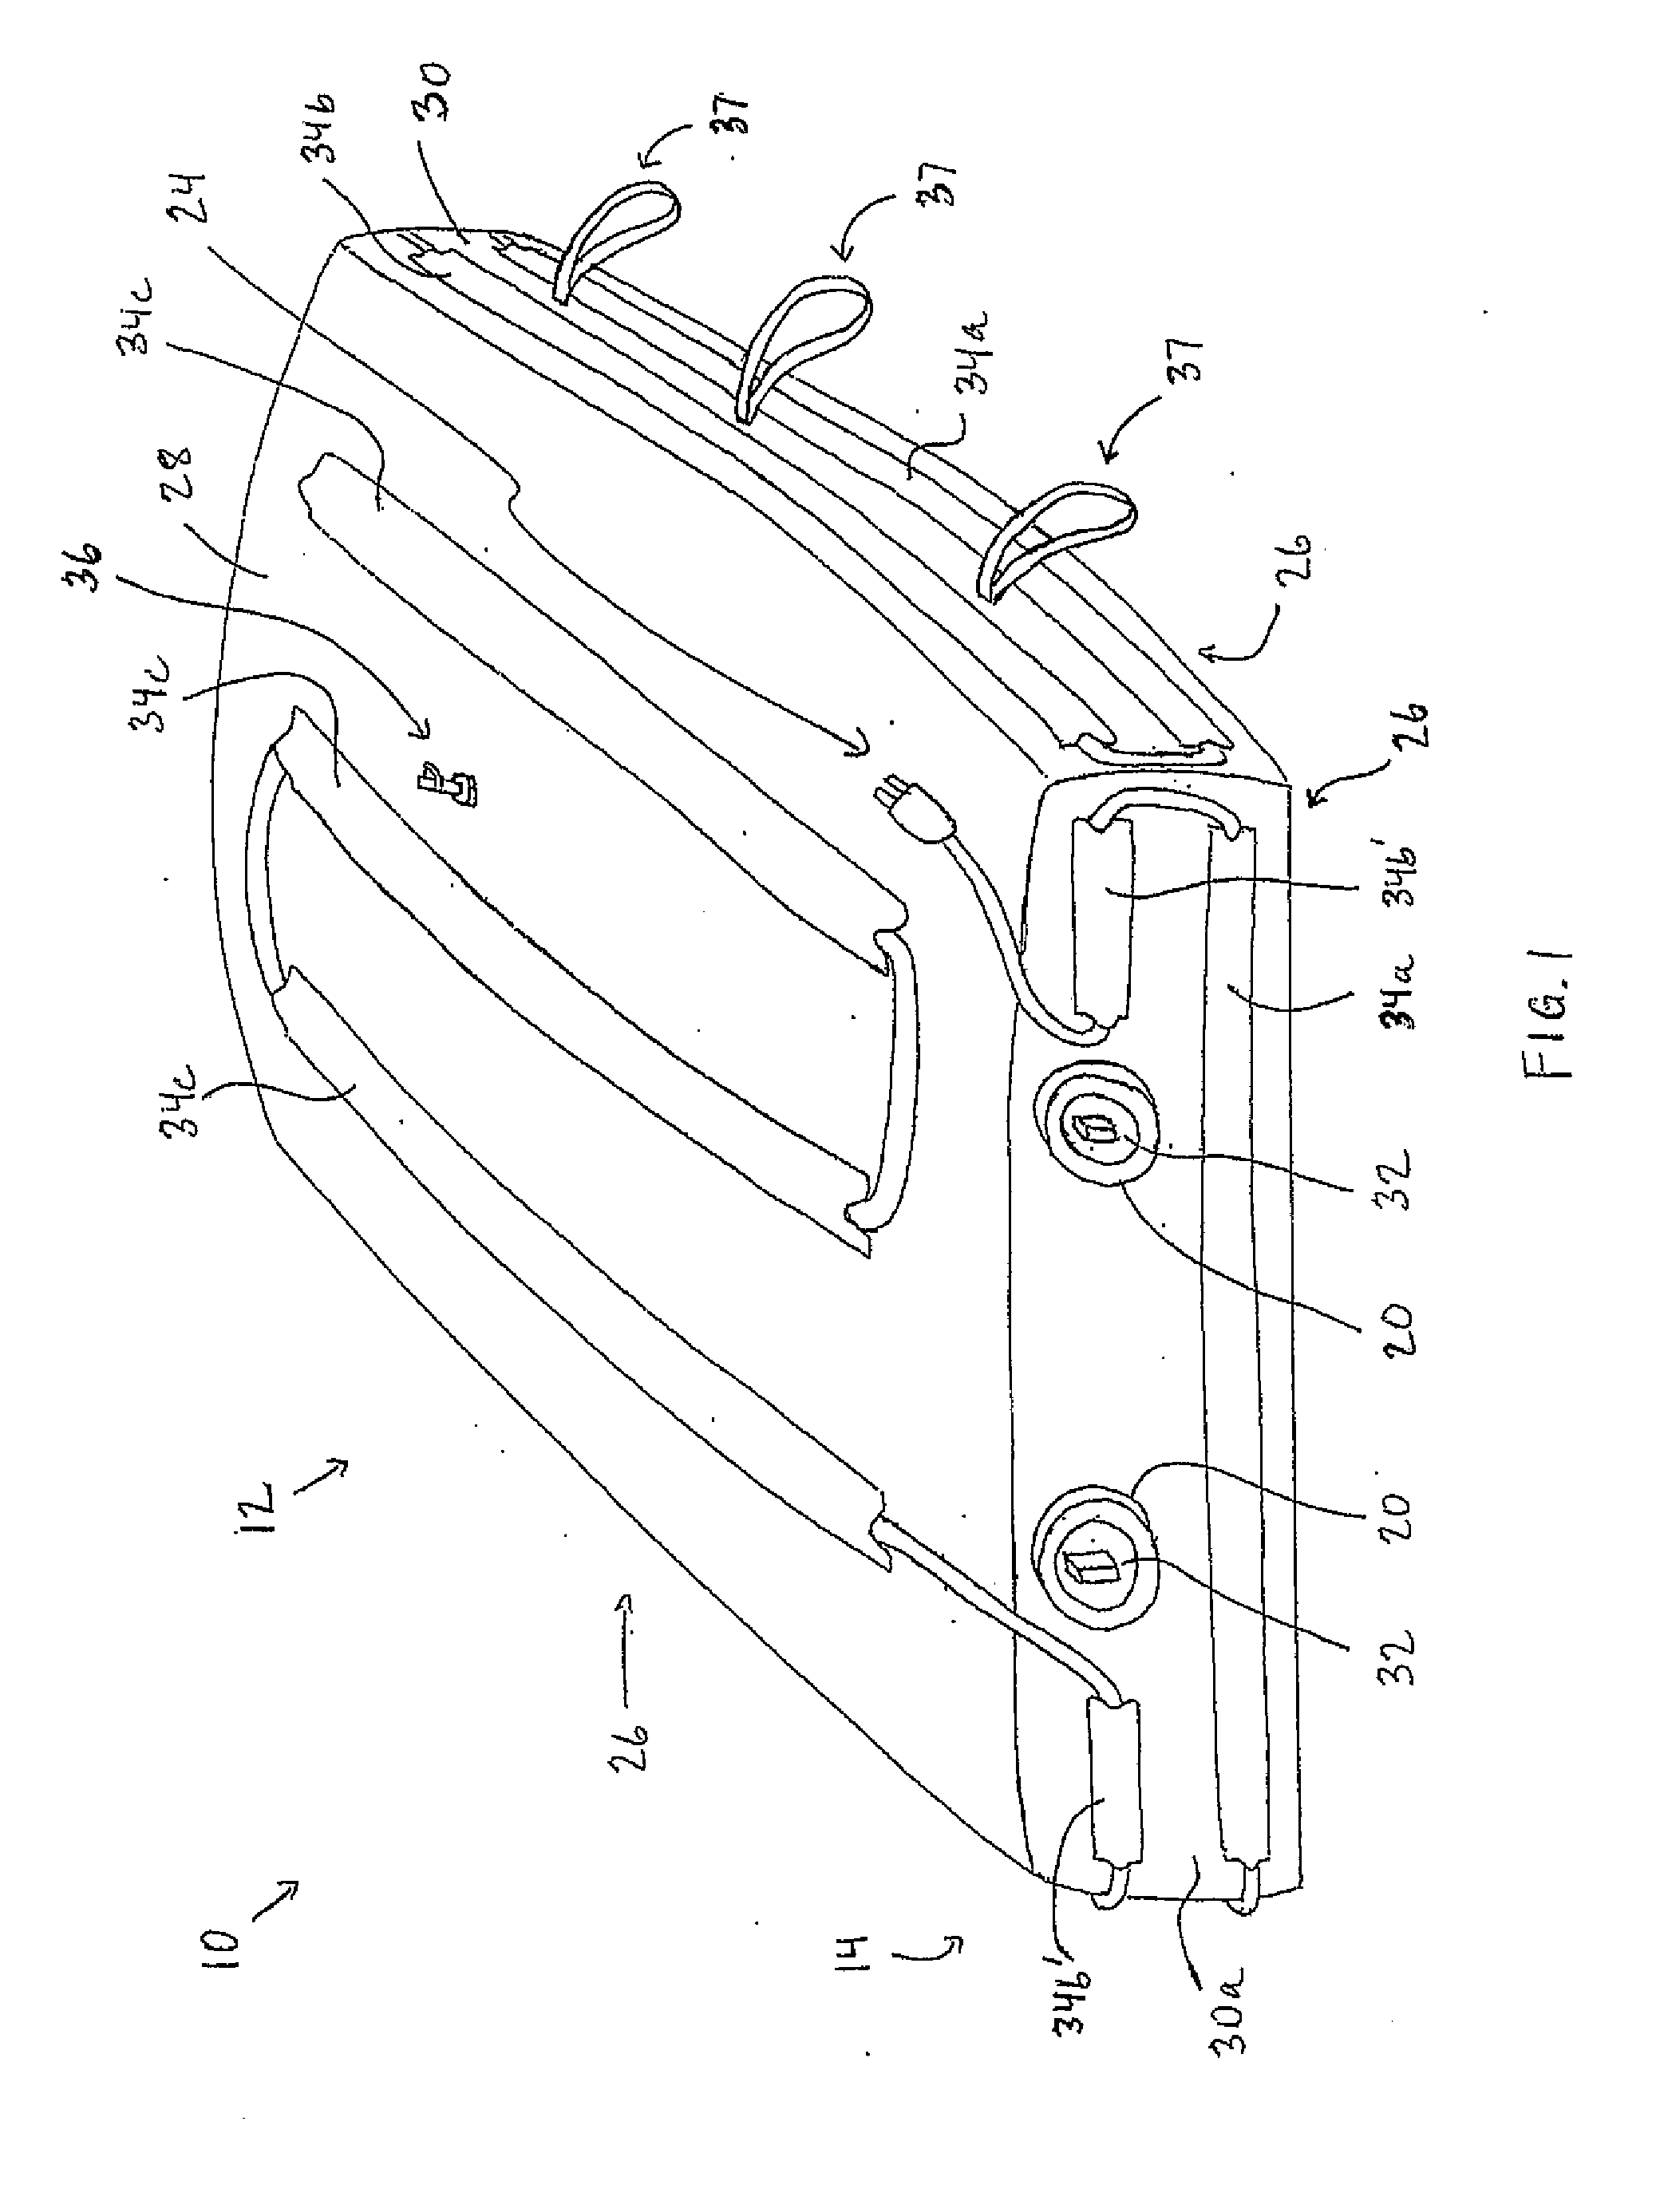 Heated Portable Tank for Containing Waste Material Therein